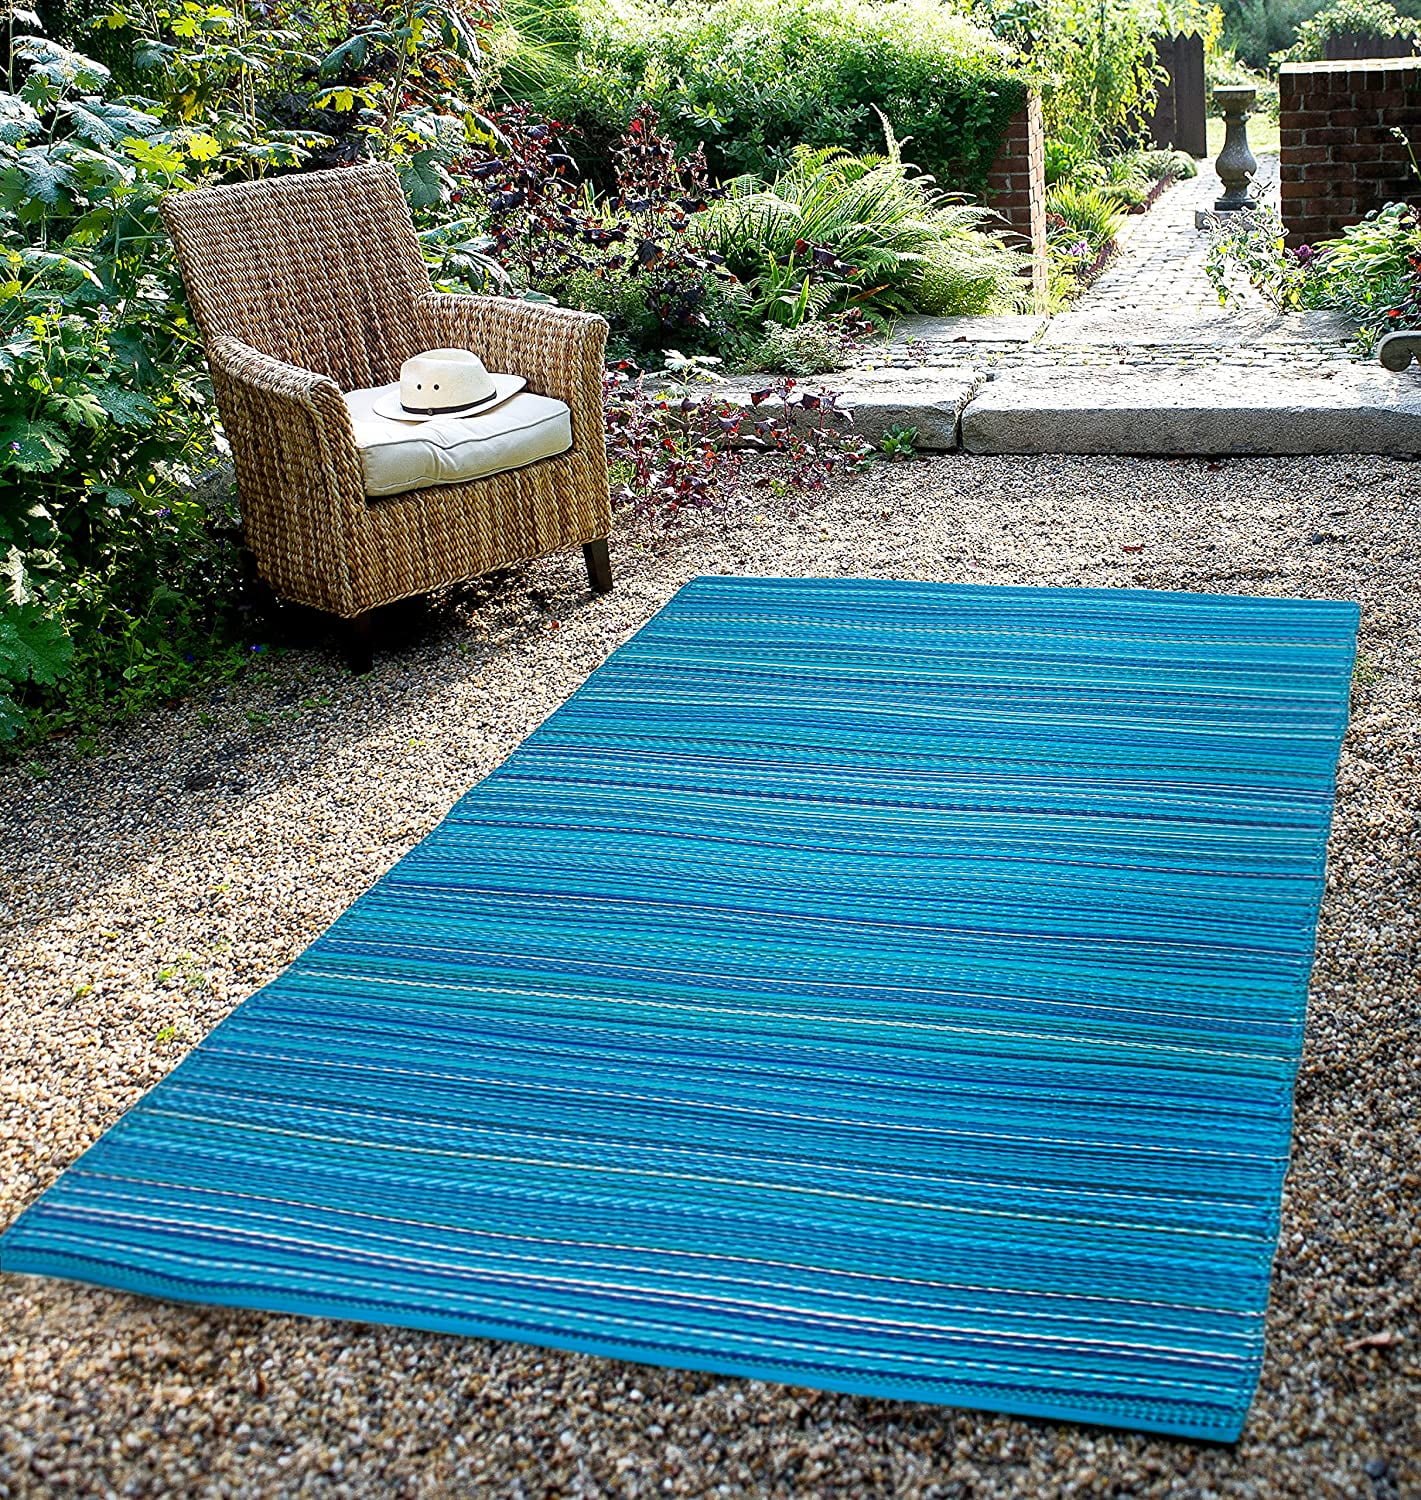 Fab Habitat Geometric Modern Outdoor Rug - Waterproof, Fade Resistant, Reversible - Recycled Plastic - Patio Porch Balcony Deck - Tokyo Teal - 4x6 ft